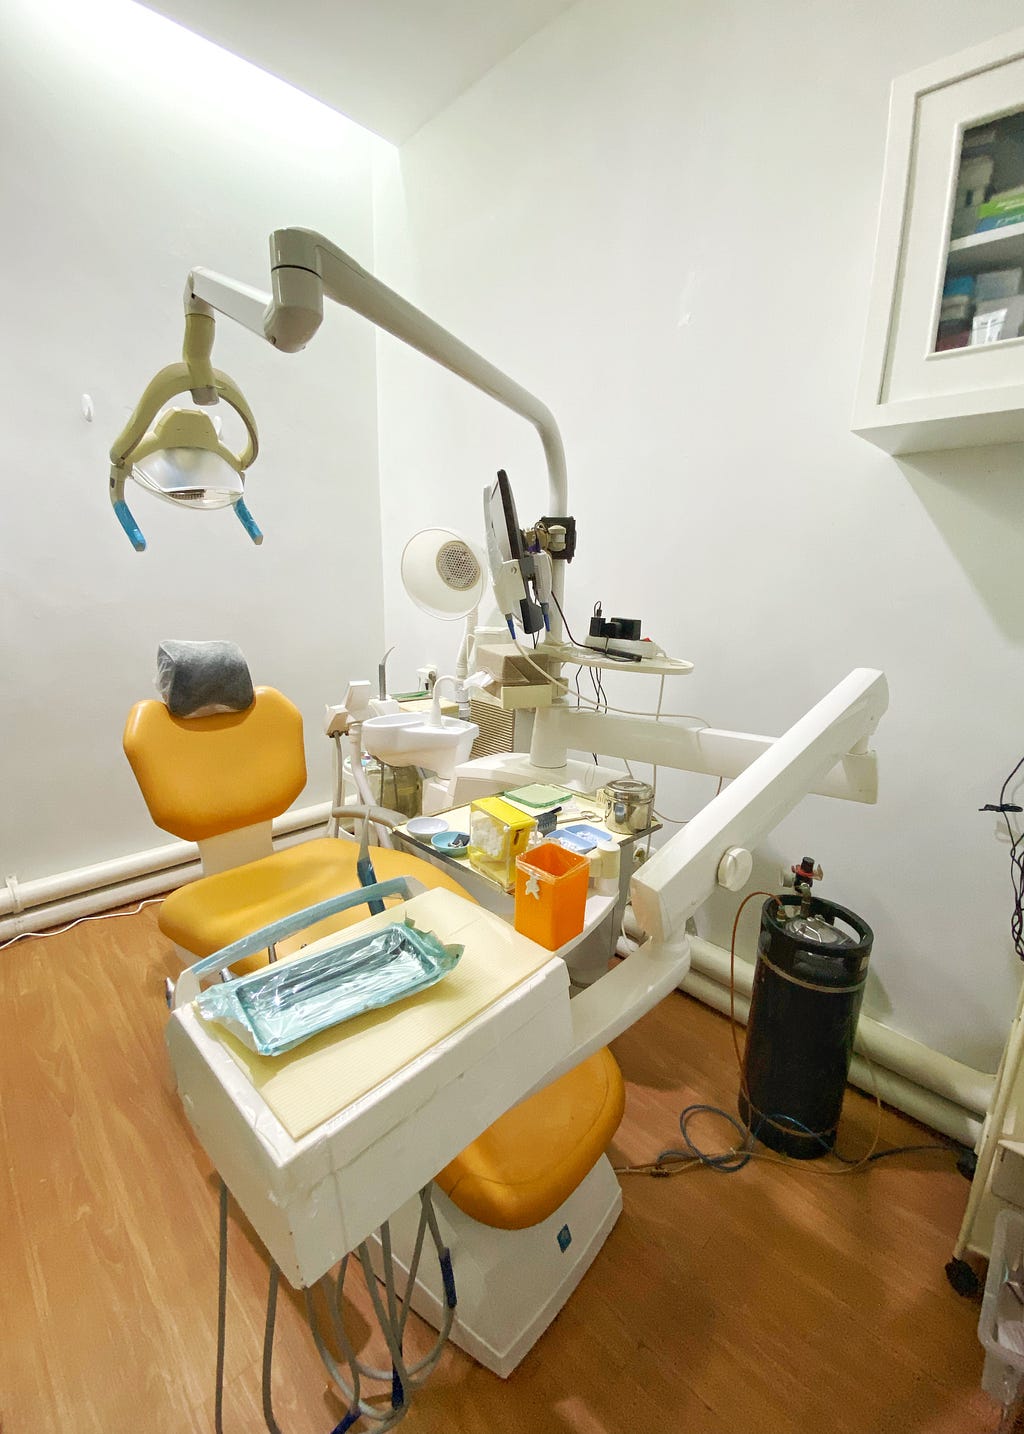 Dental chair and equipments